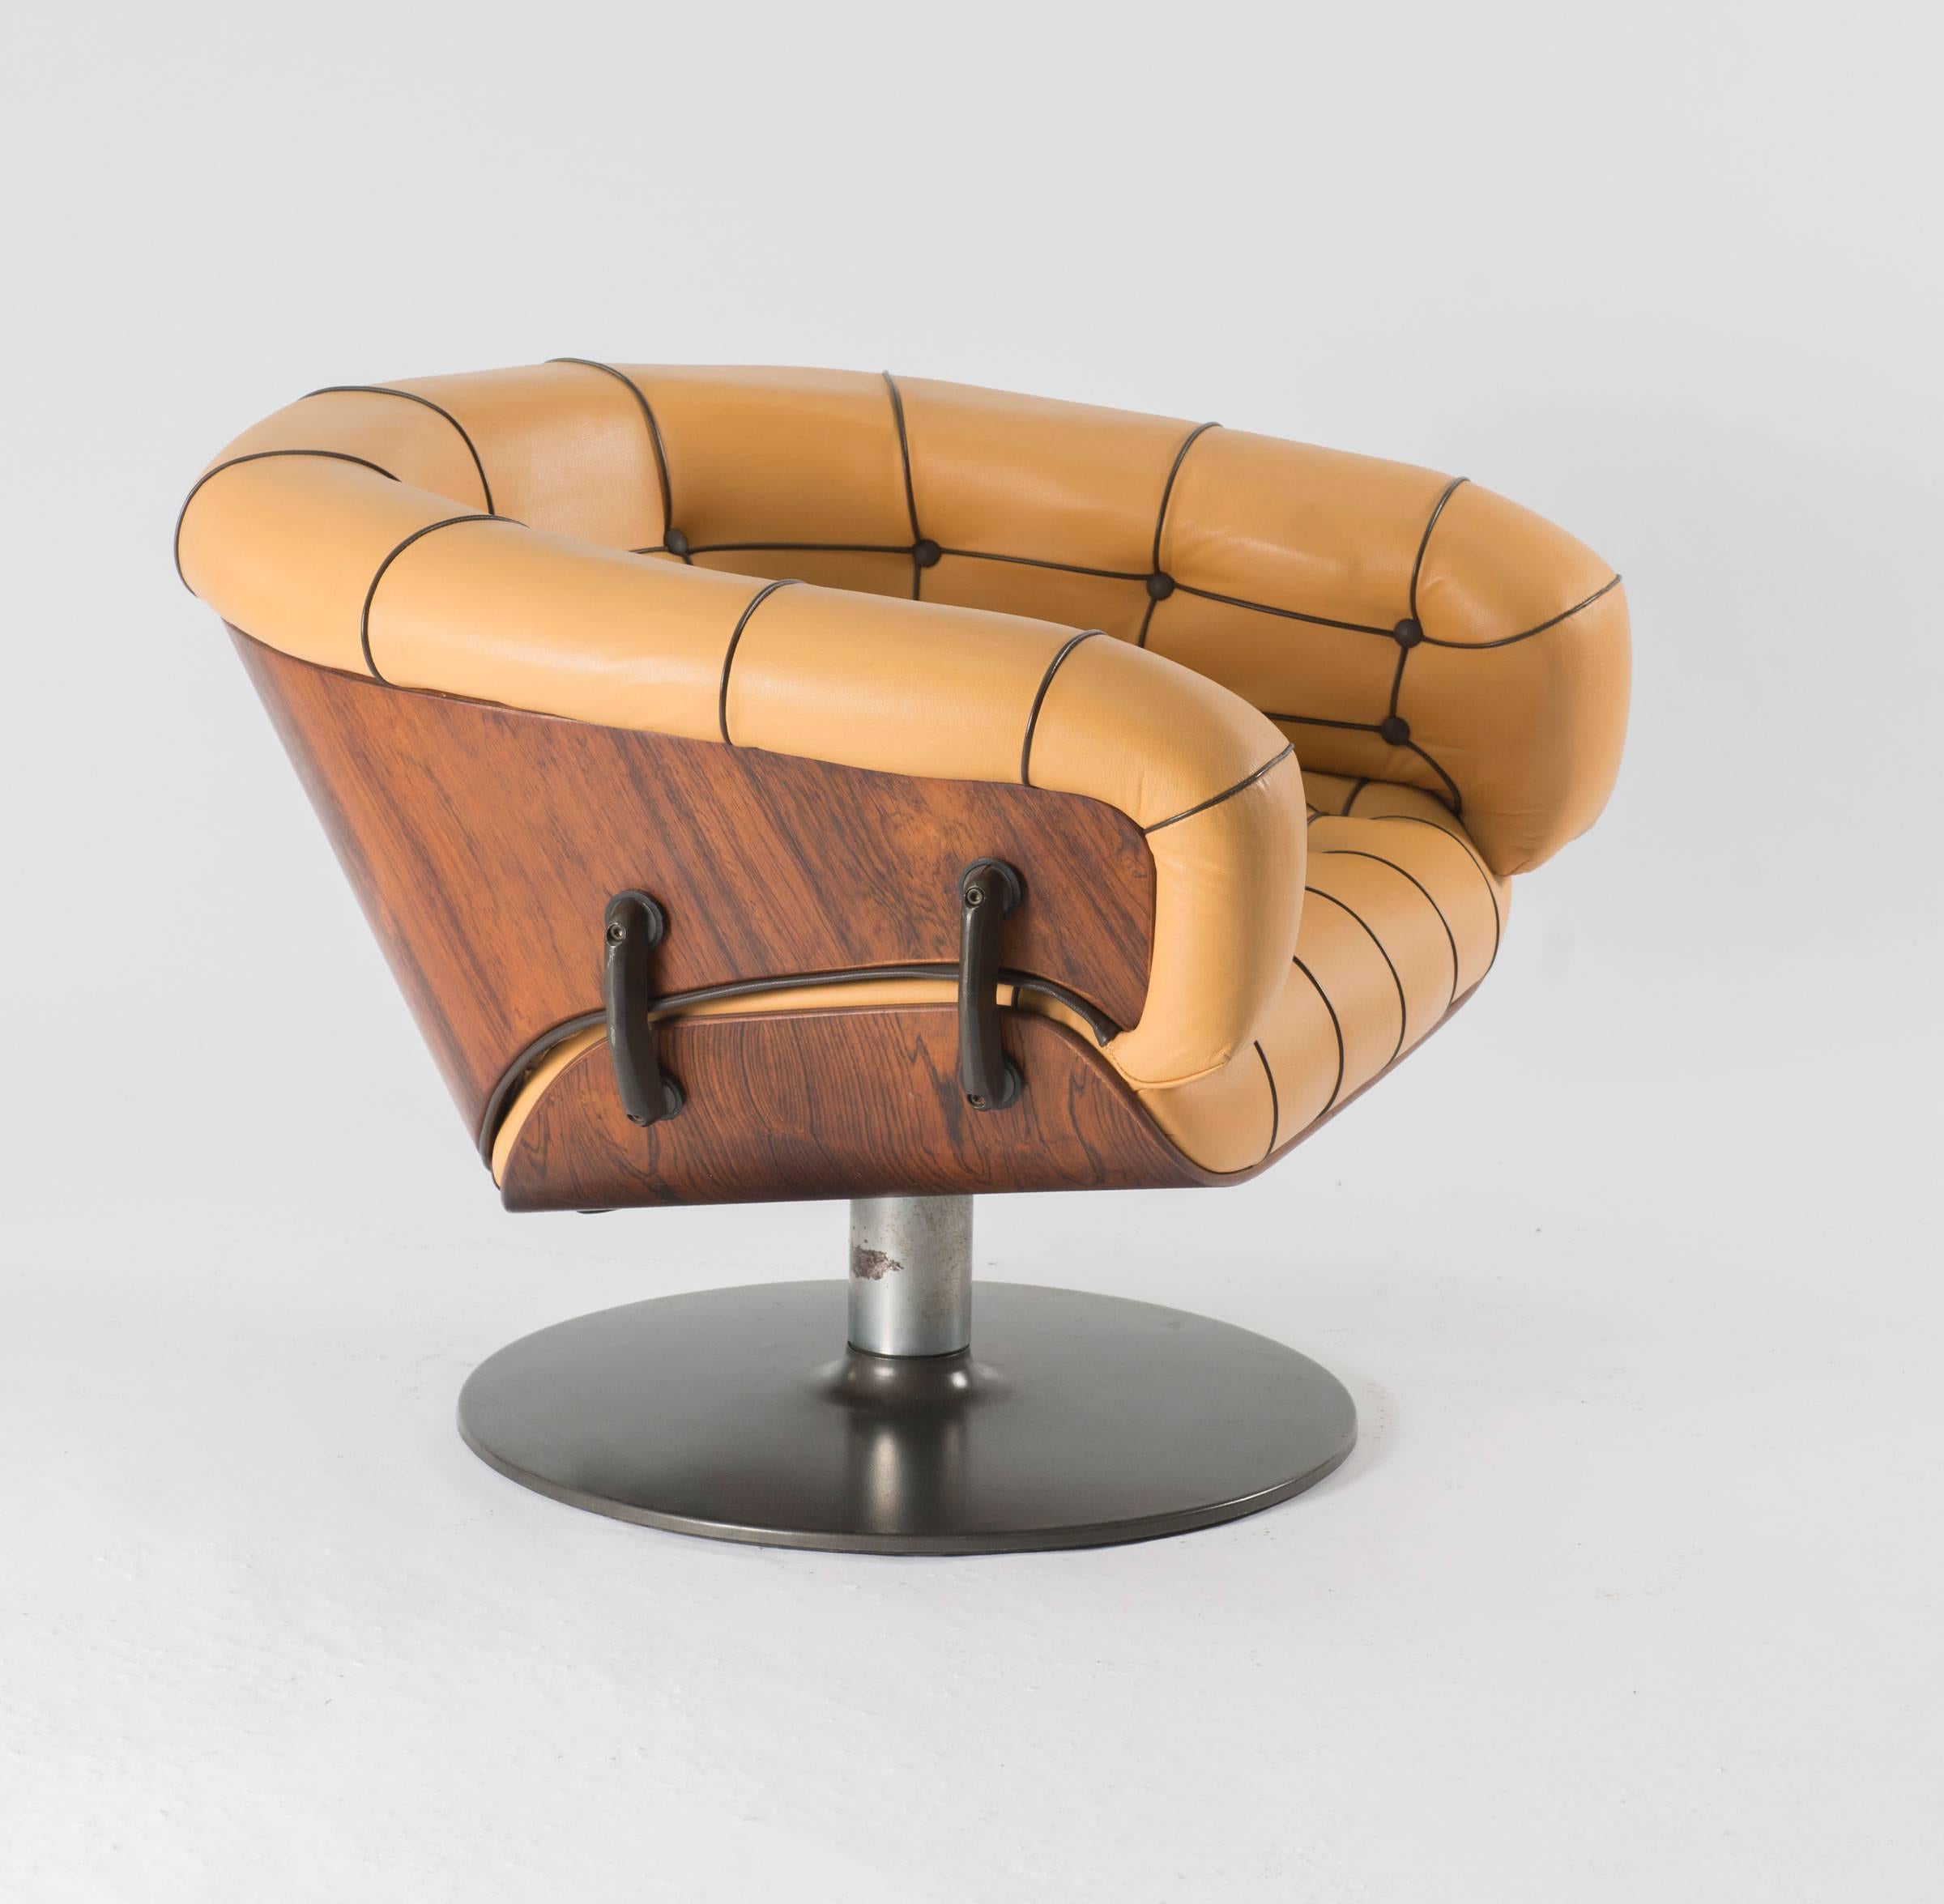 Rare swivel chair designed by Martin Grierson for Arflex. Italy, circa 1960. Base in lacquered metal, structure in black painted aluminum and shell veined laminated rosewood. Padding yellow skin. Bibliography: by M. Smith, the modern furniture,